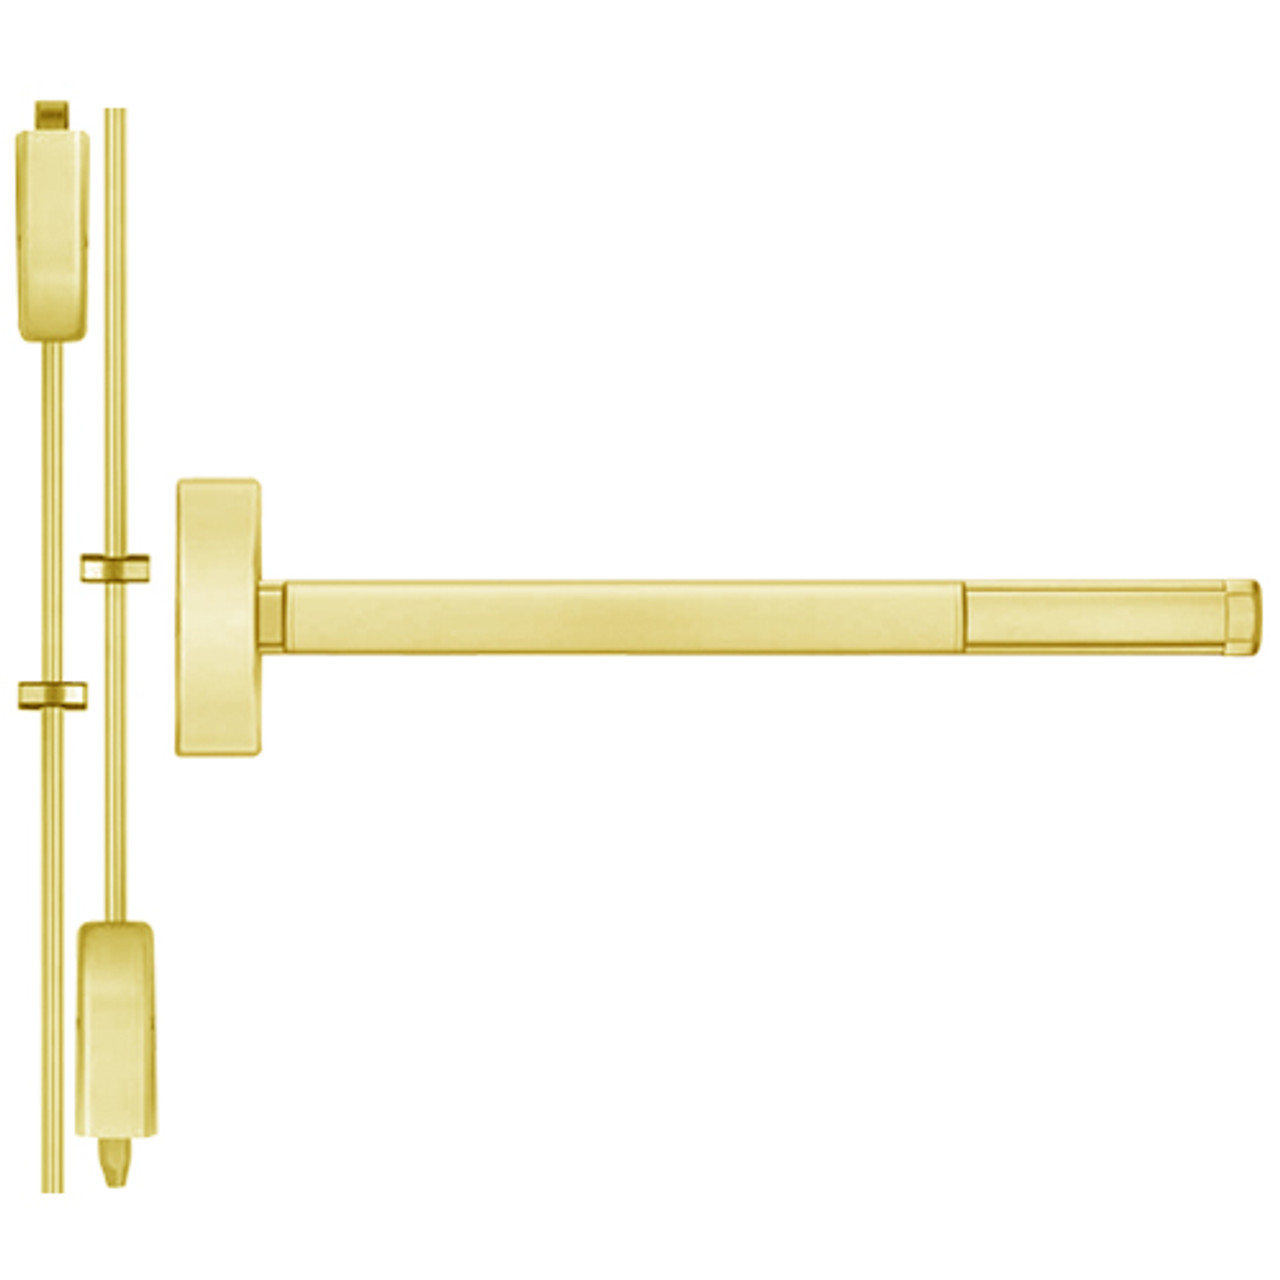 TSFL2203LBR-605-48 PHI 2200 Series Apex Surface Vertical Rod Device with Touchbar Monitoring Switch Prepped for Key Retracts Latchbolt in Bright Brass Finish